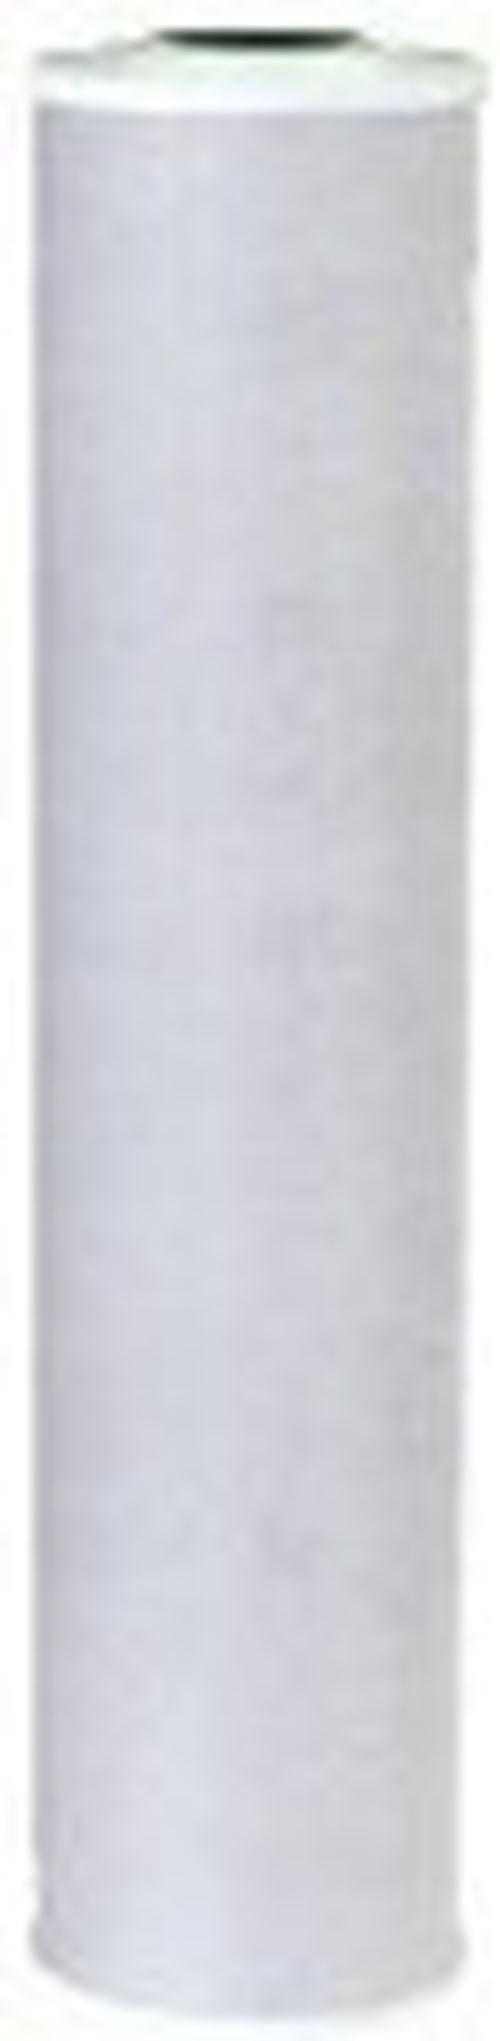 American Plumber WRC25HD20 Compatible 20 x 4.5 Whole House Carbon Water Filter